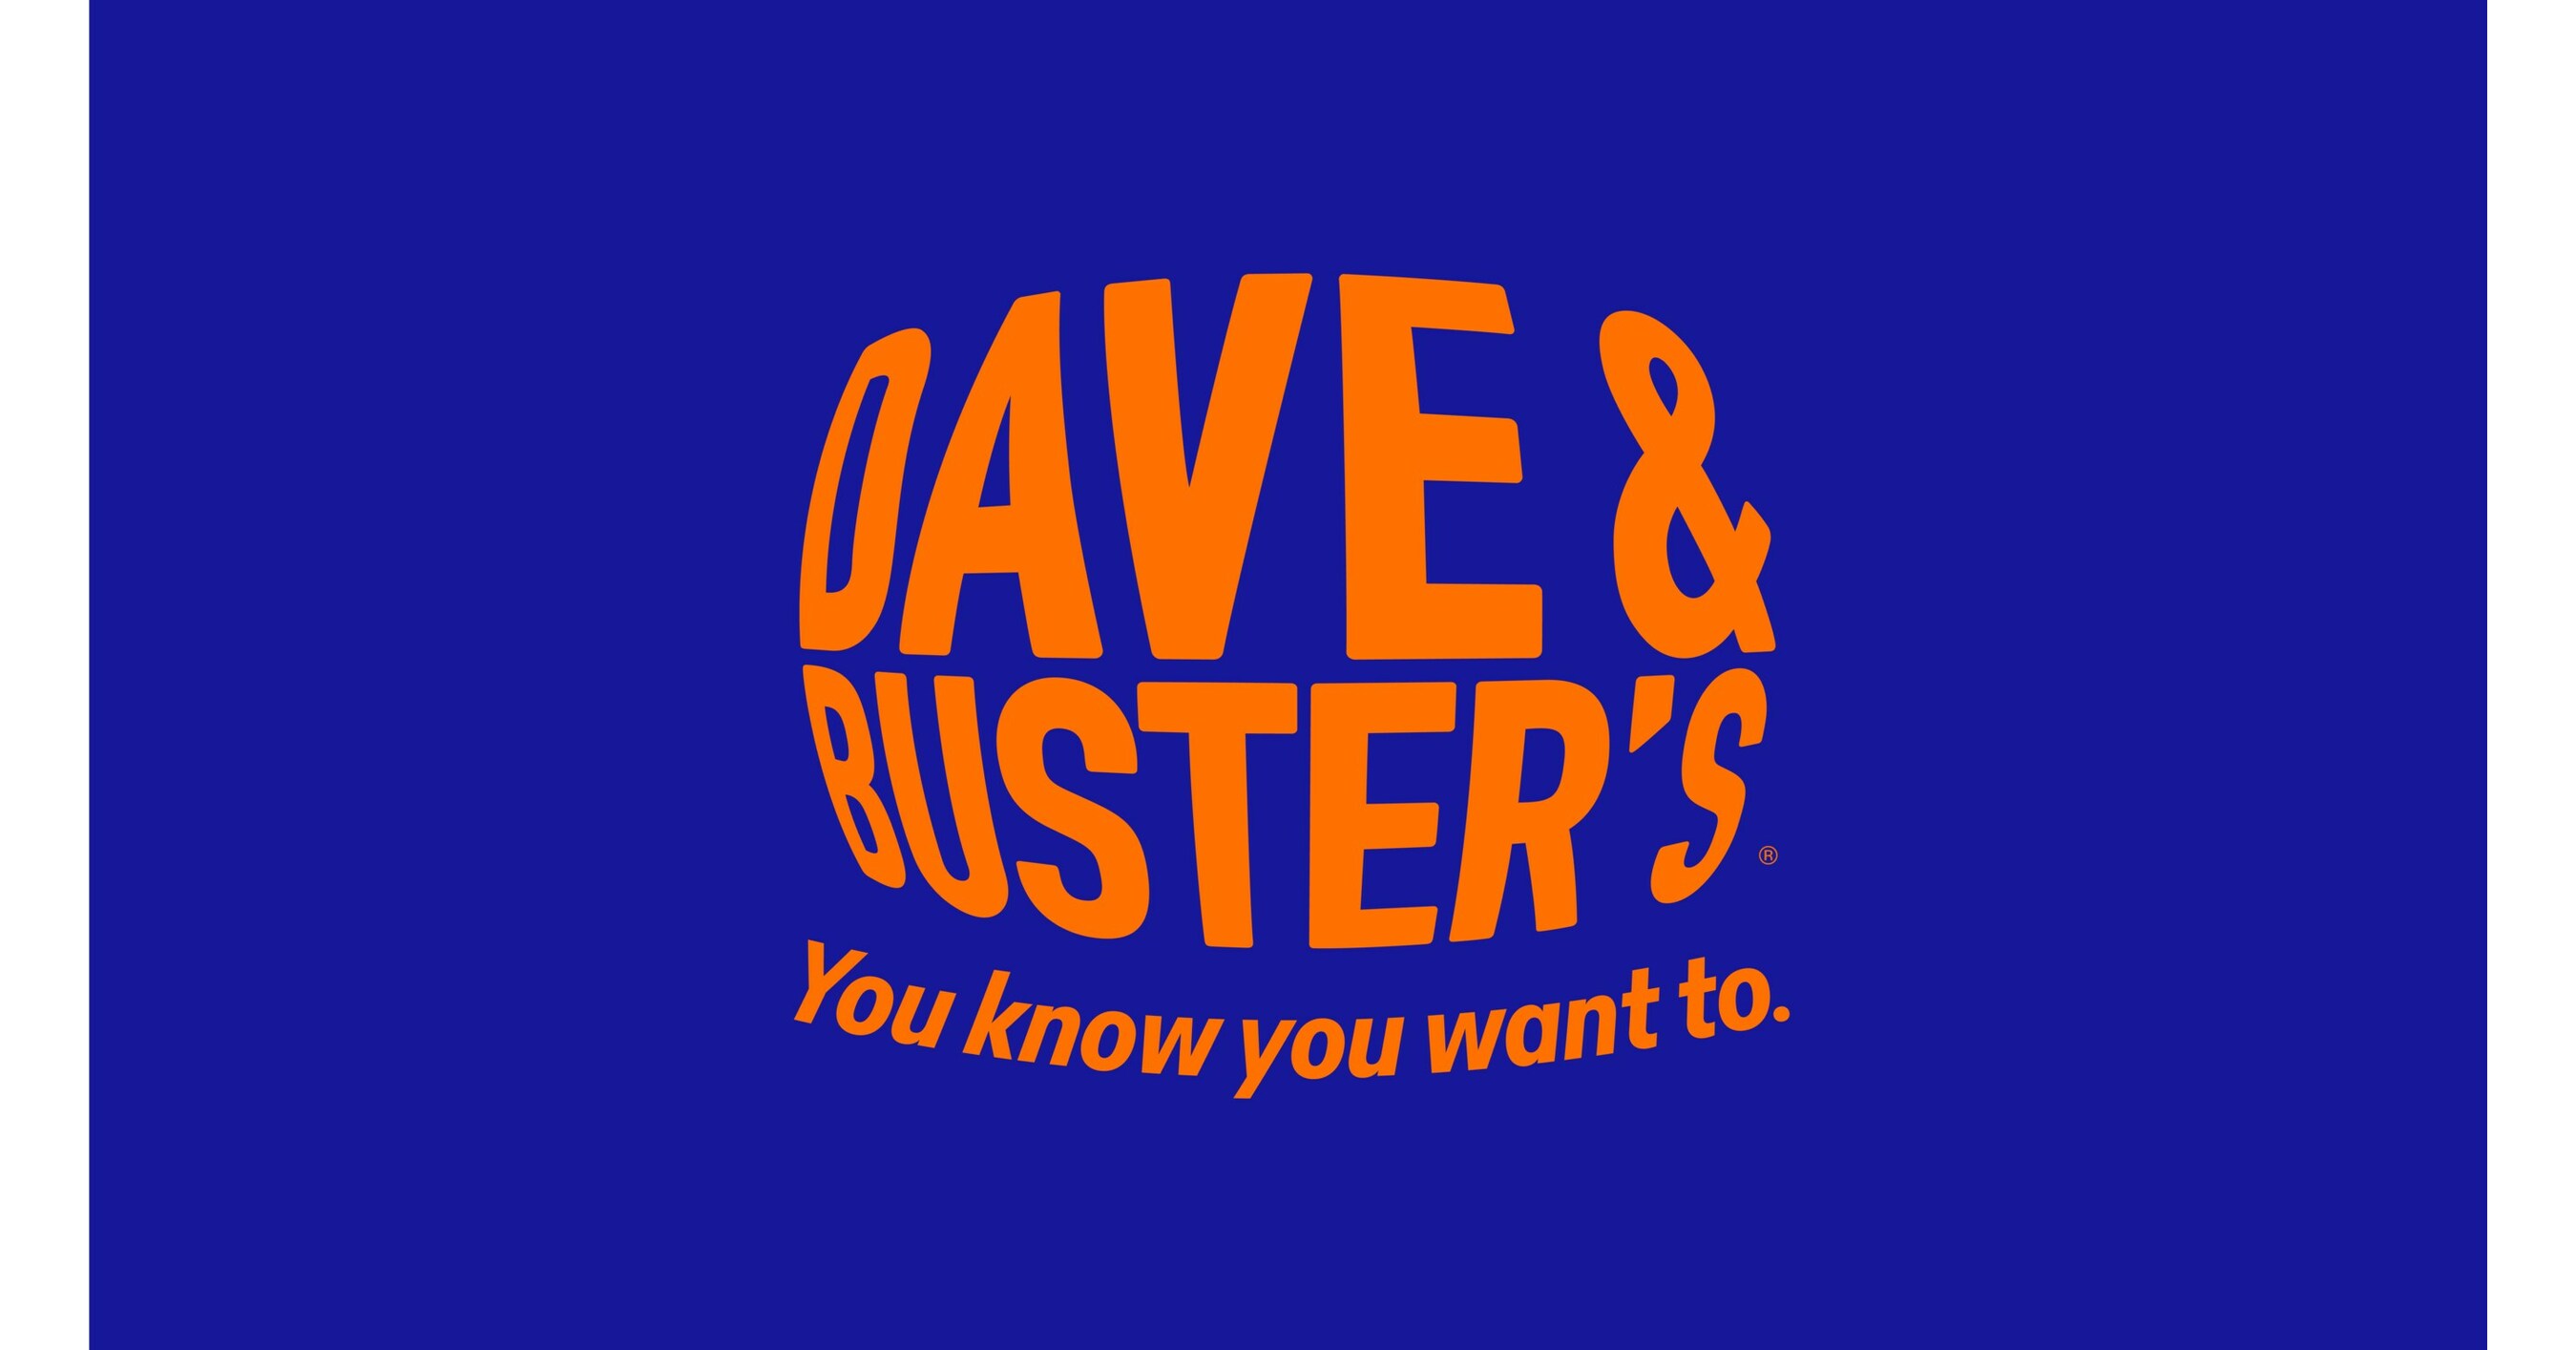 Dave & Buster's - Limited Time Offer. Open your Dave & Buster's app on your  phone and receive $20 in Free Game play when you purchase $20 through the  App. Offer ends